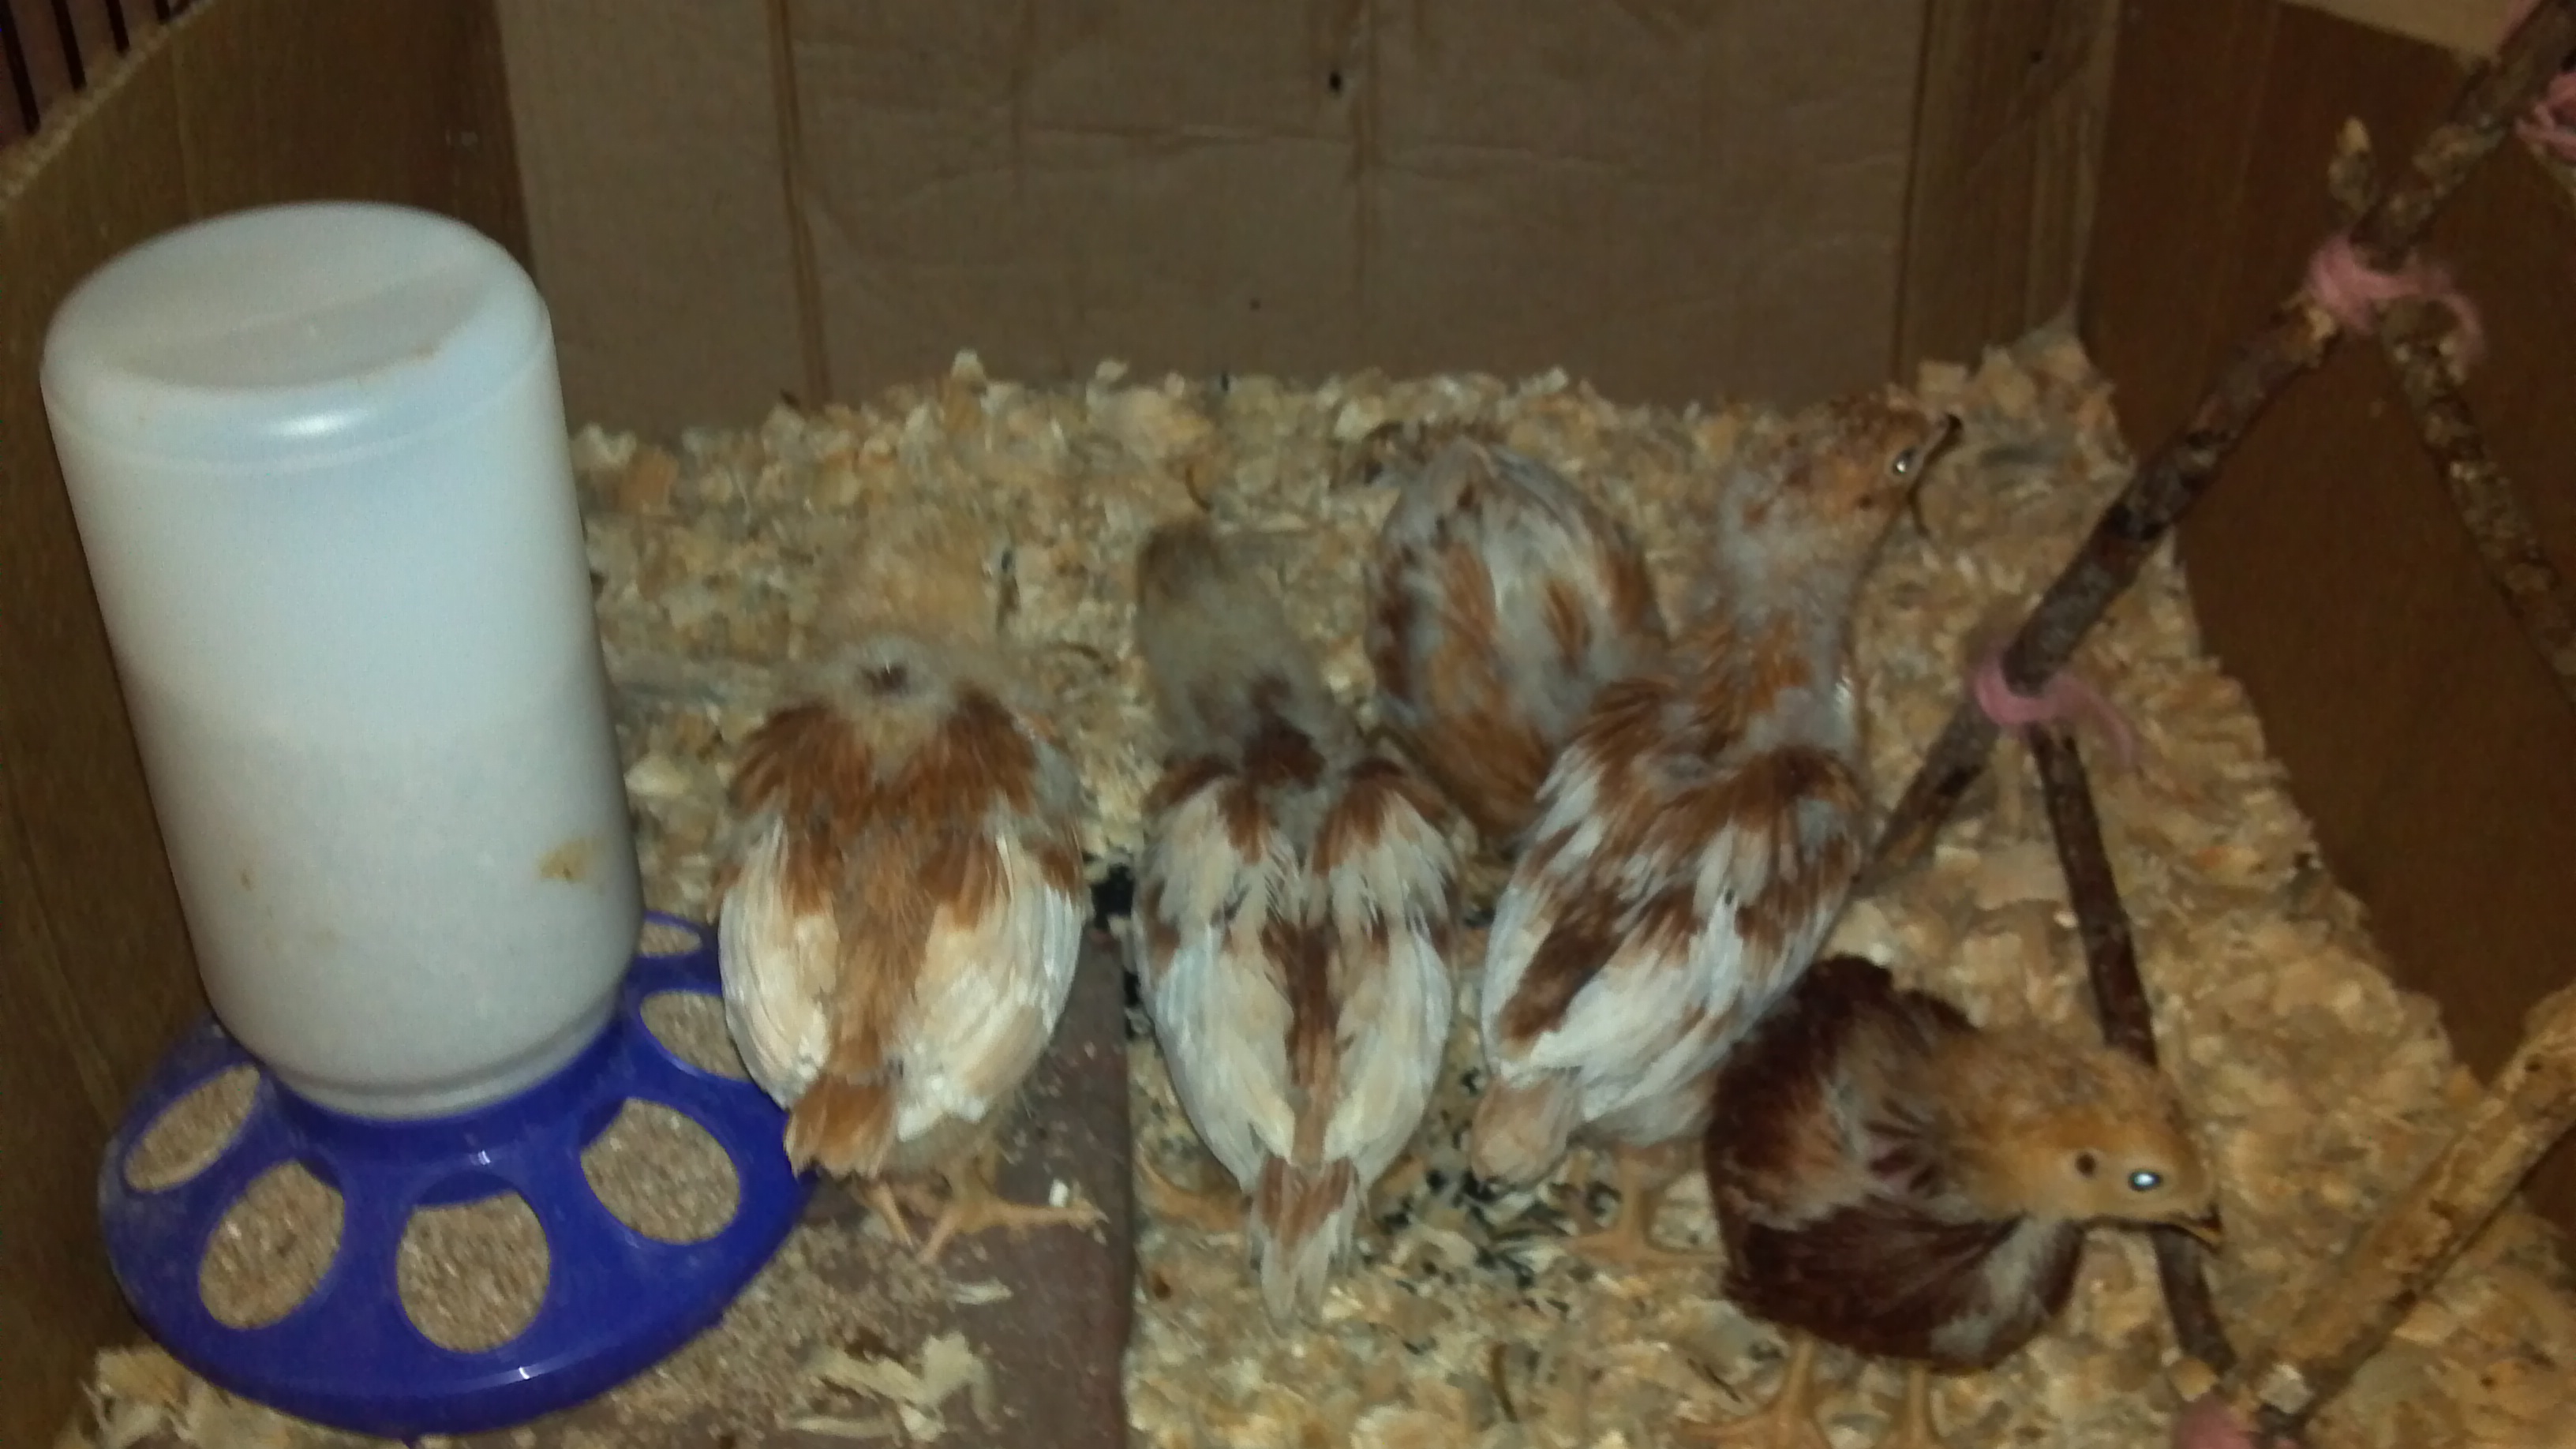 Here's a good look at my chicks backs these were hatched on about Feb 26th so they will be 4 wks on Sunday ...there are 4some "pullets"and 2 are "red pullets" ... but not sure what breed they are...ideas?